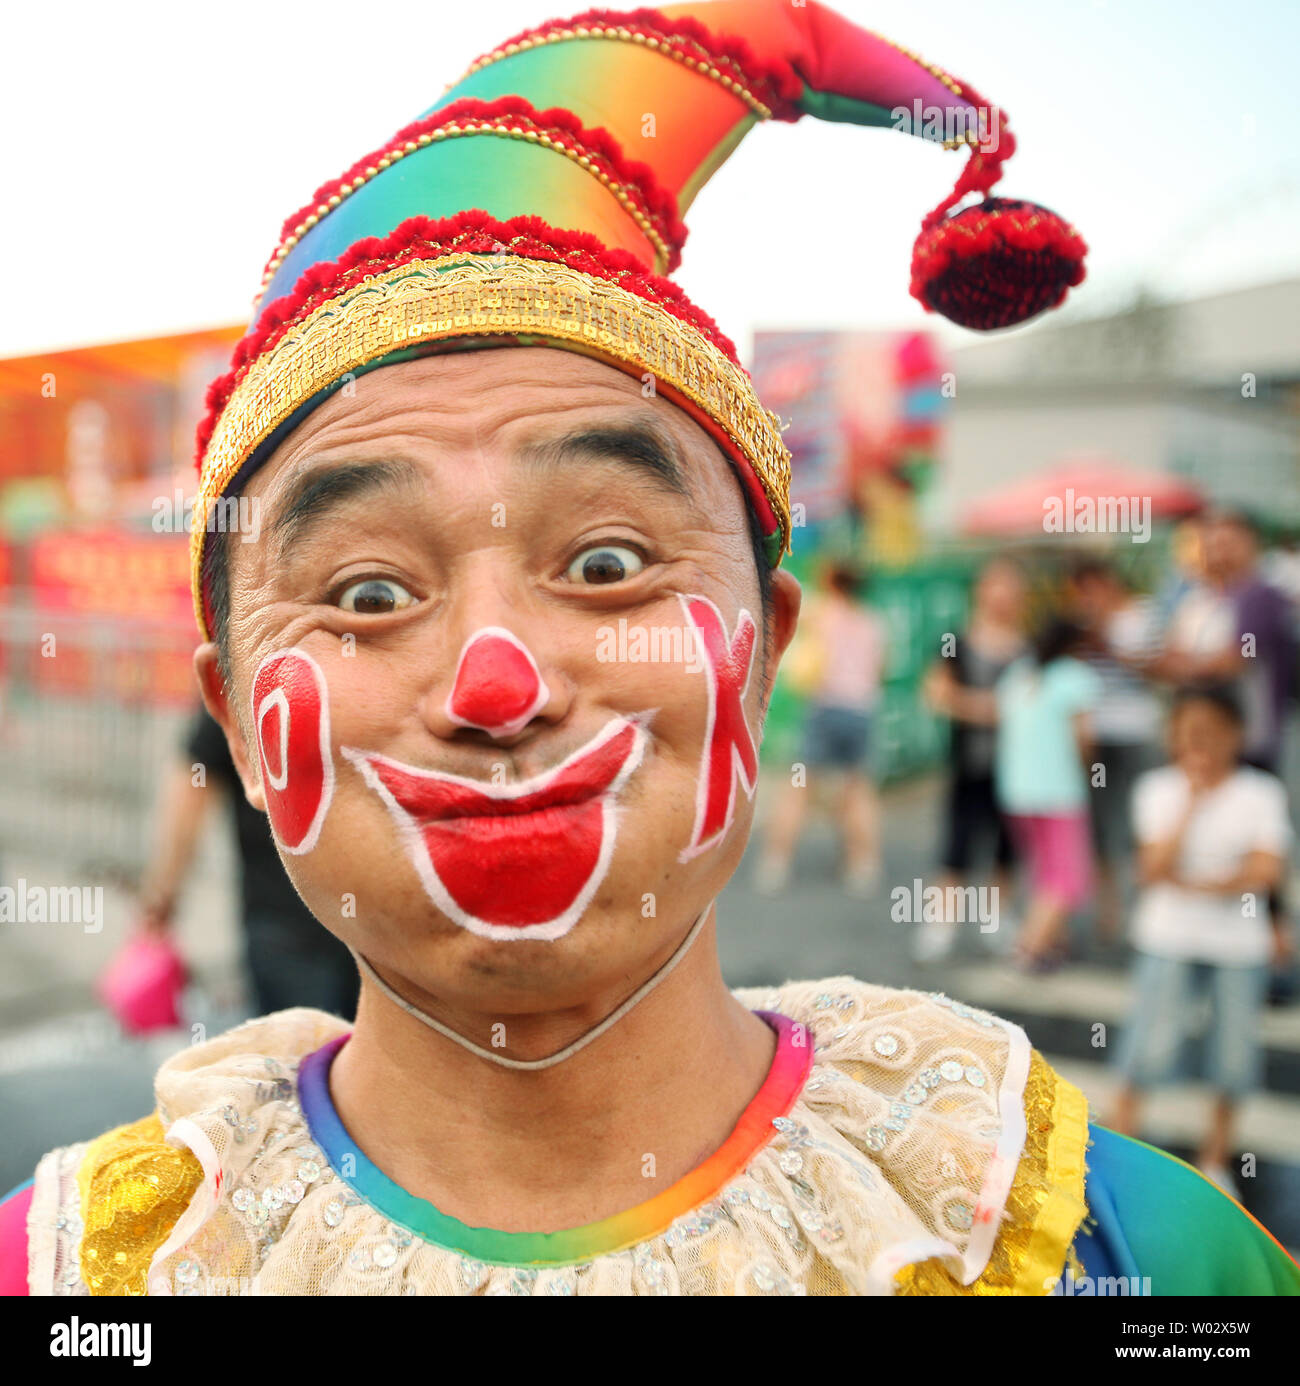 a-chinese-clown-stands-outside-a-russian-circus-hoping-to-attract-customers-in-beijing-on-august-26-2009-upistephen-shaver-W02X5W.jpg